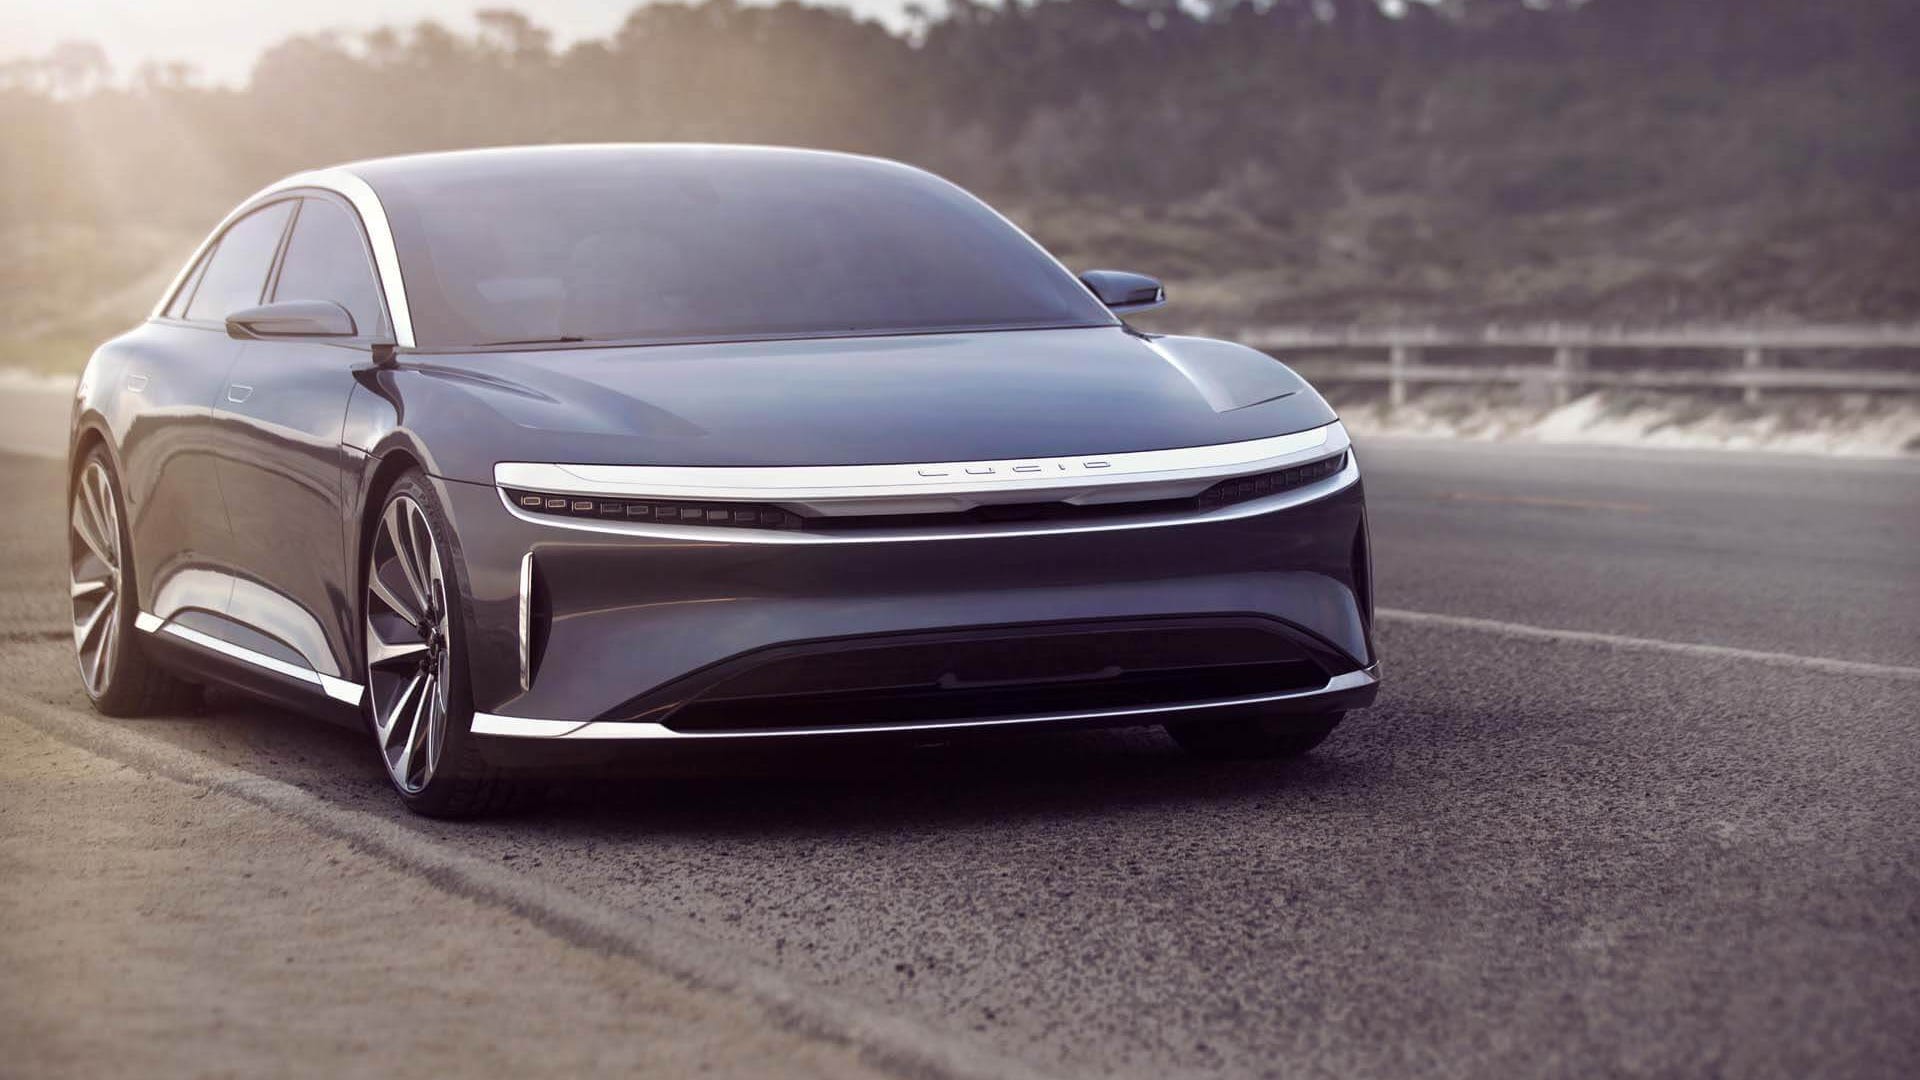 Lucid Motors aims for 500-mile range EV with Lucid Air electric car